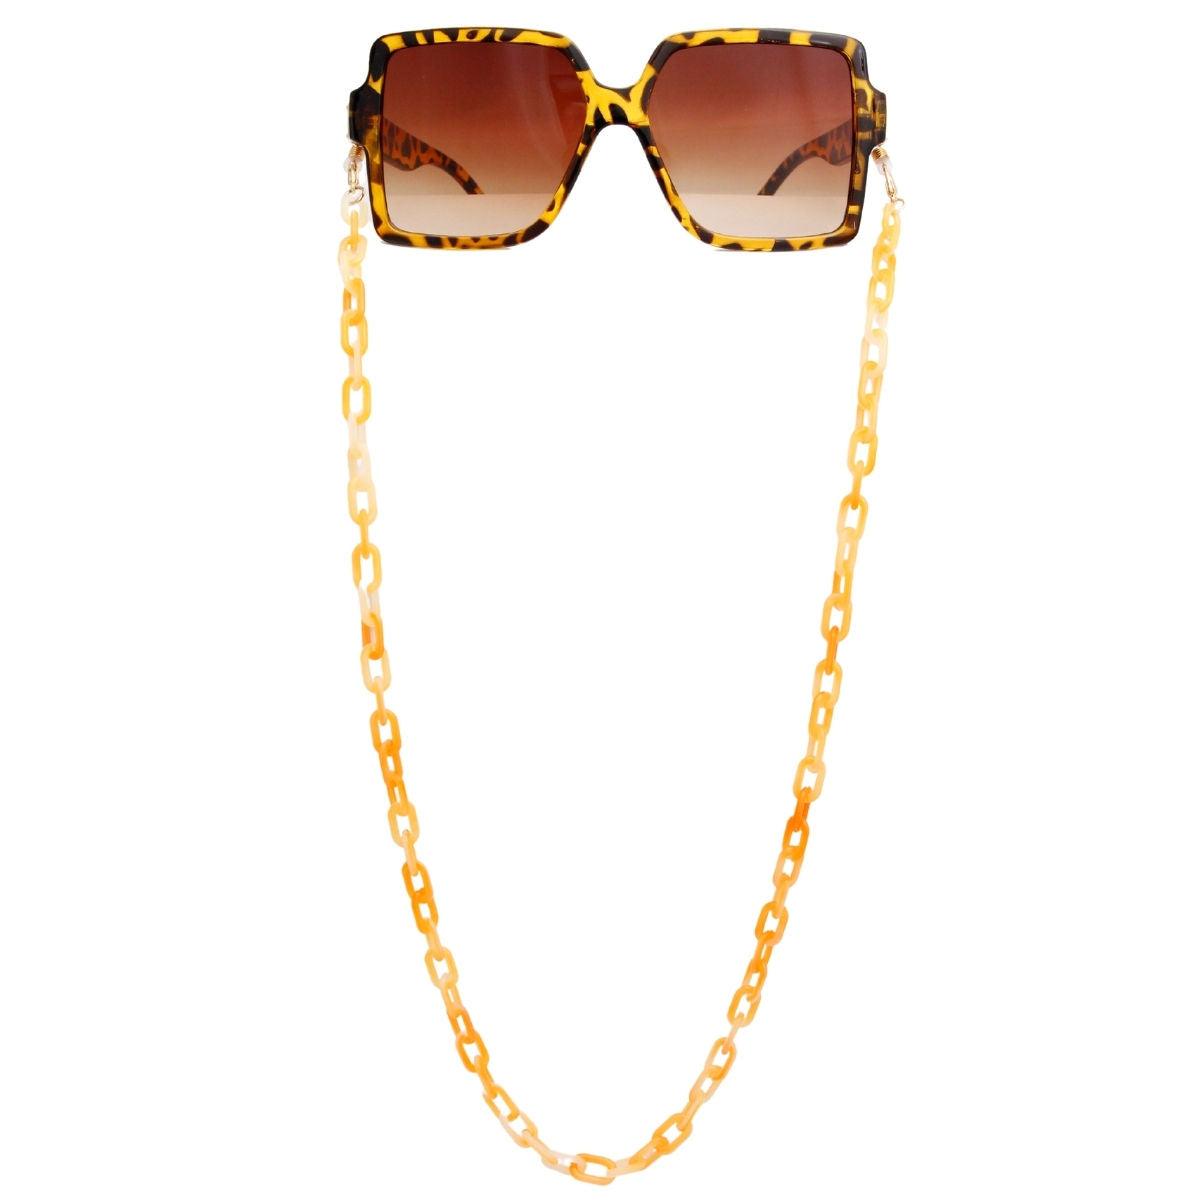 Affordable & Chic Sunglass Chain: Don't Miss Our Valencia Link